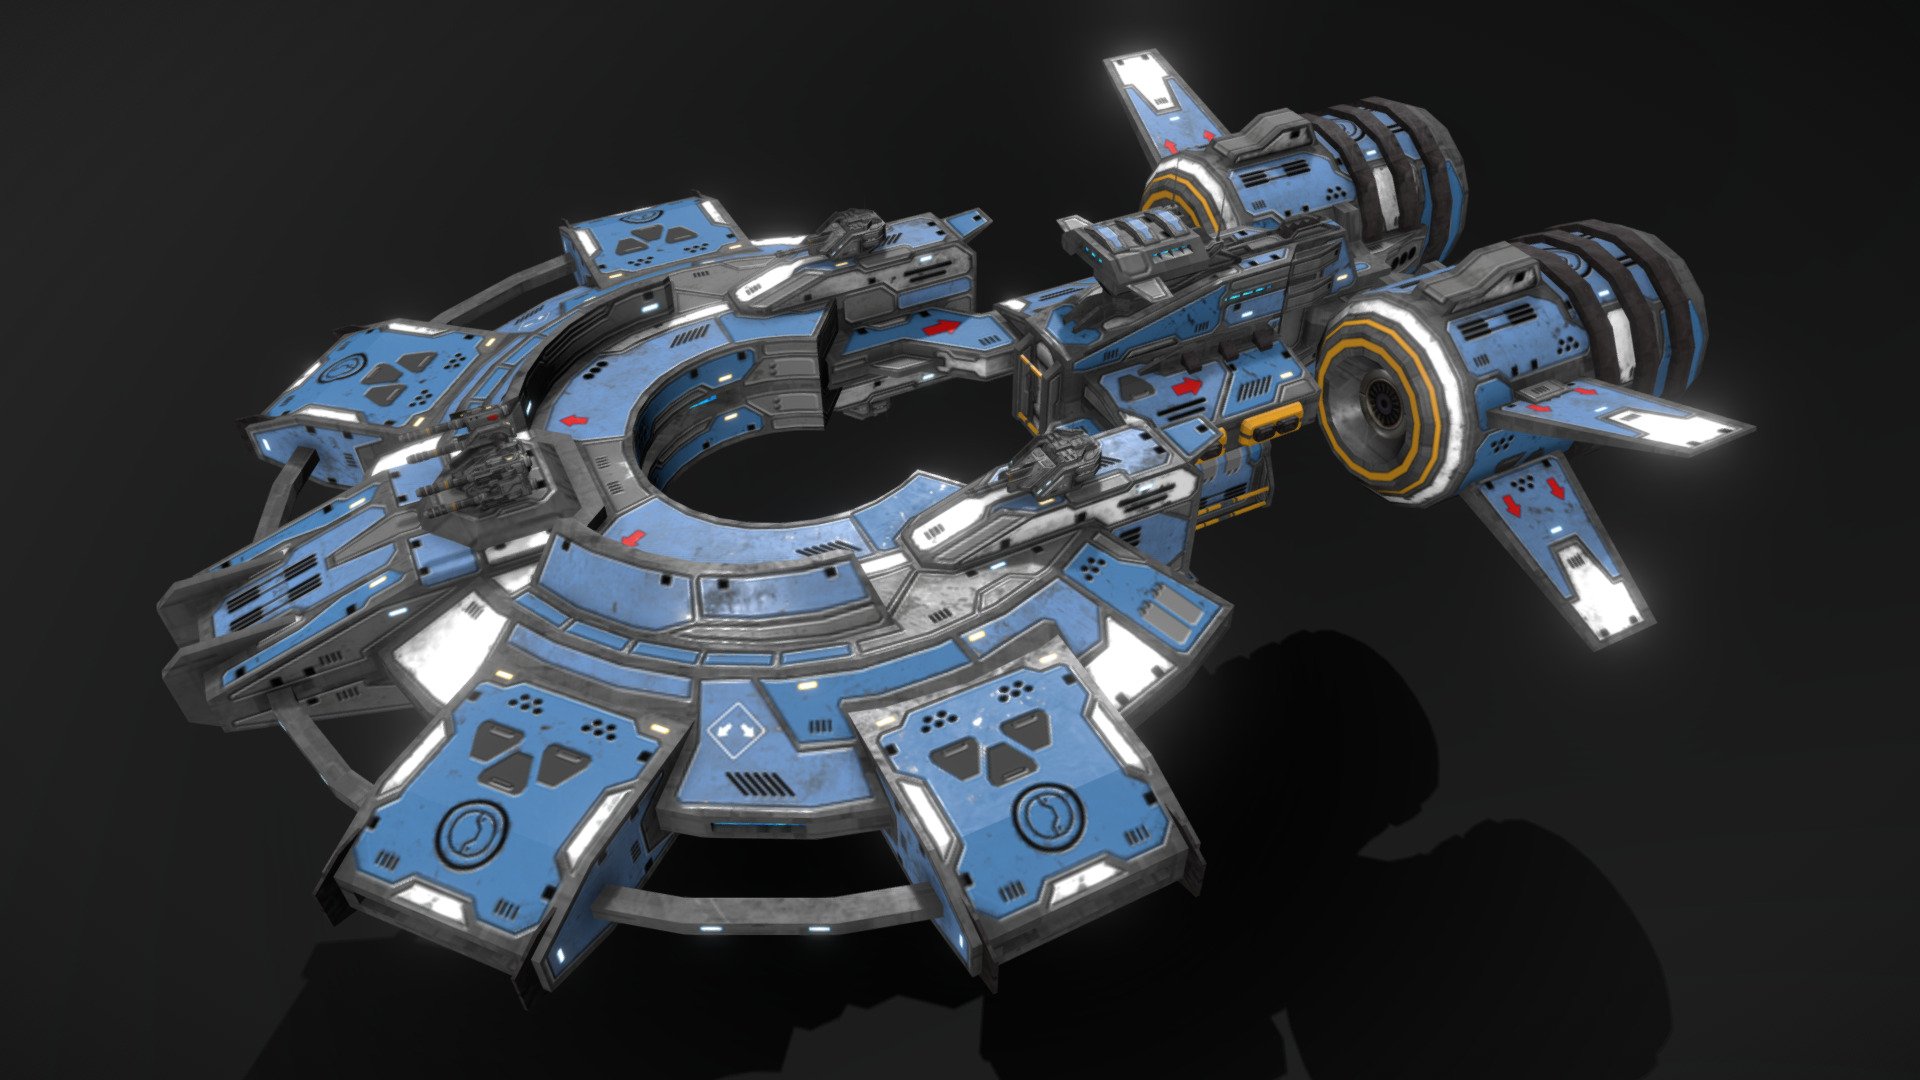 This is a model of a low-poly and game-ready scifi spaceship. 

The weapons are separate meshes and can be animated with a keyframe animation tool. The weapon loadout can be changed as well.

The model comes with several differently colored texture sets. The PSD file with intact layers is included too.

Please note: The textures in the Sketchfab viewer have a reduced resolution to improve Sketchfab loading speed.

If you have purchased this model please make sure to download the “additional file”.  It contains FBX and OBJ meshes, full resolution textures and the source PSDs with intact layers. The meshes are separate and can be animated (e.g. firing animations for gun barrels, rotating turrets, etc) 3d model